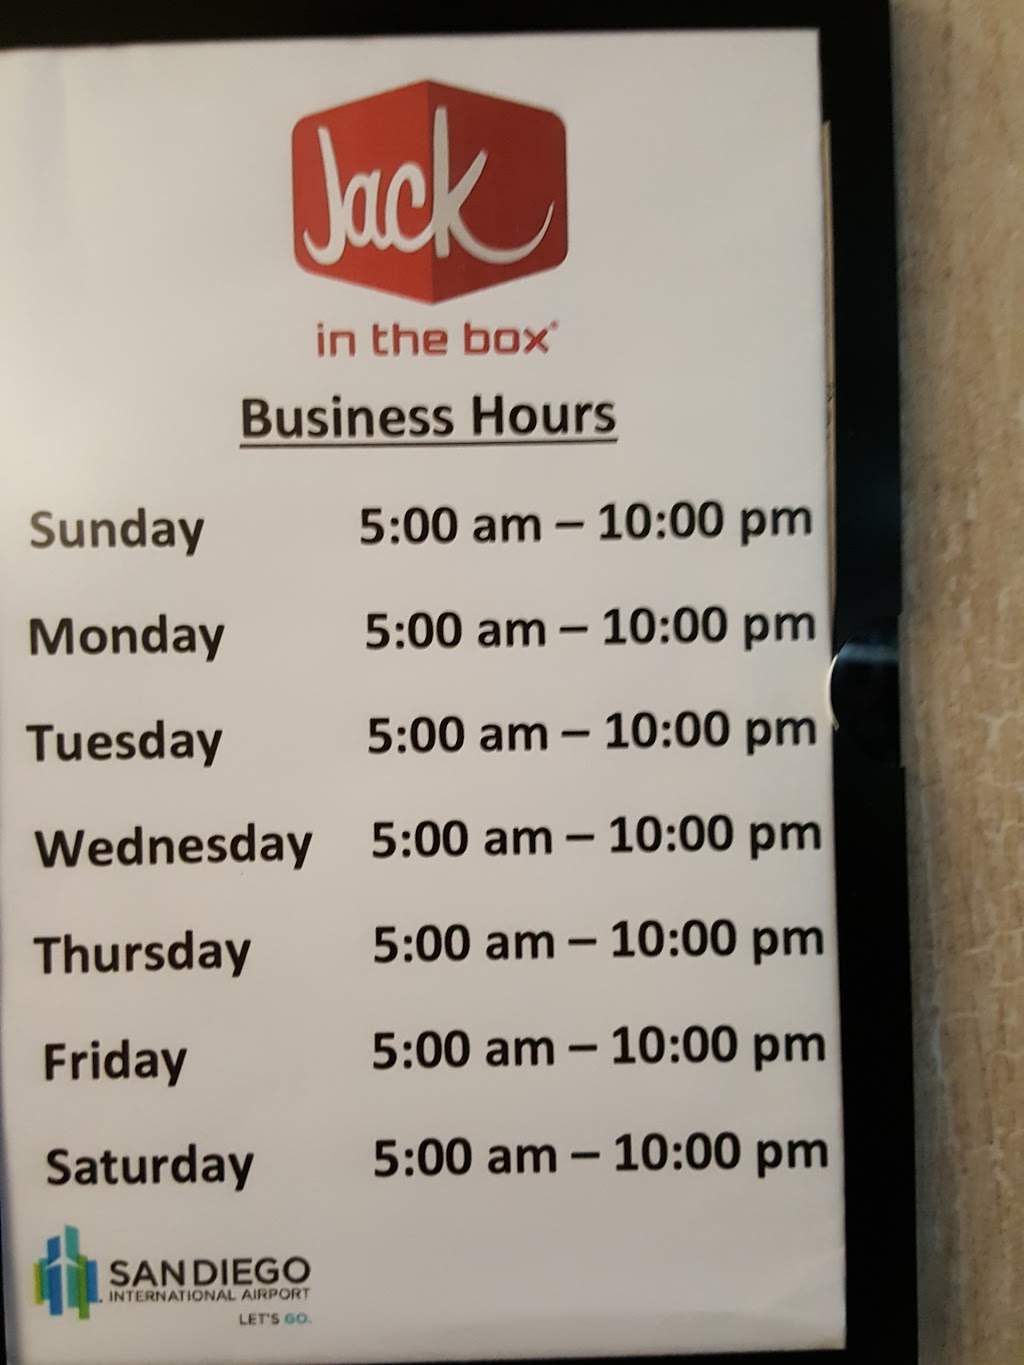 Jack in the Box | Terminal 1 West Space 1024, San Diego, CA 92101 | Phone: (619) 297-0095